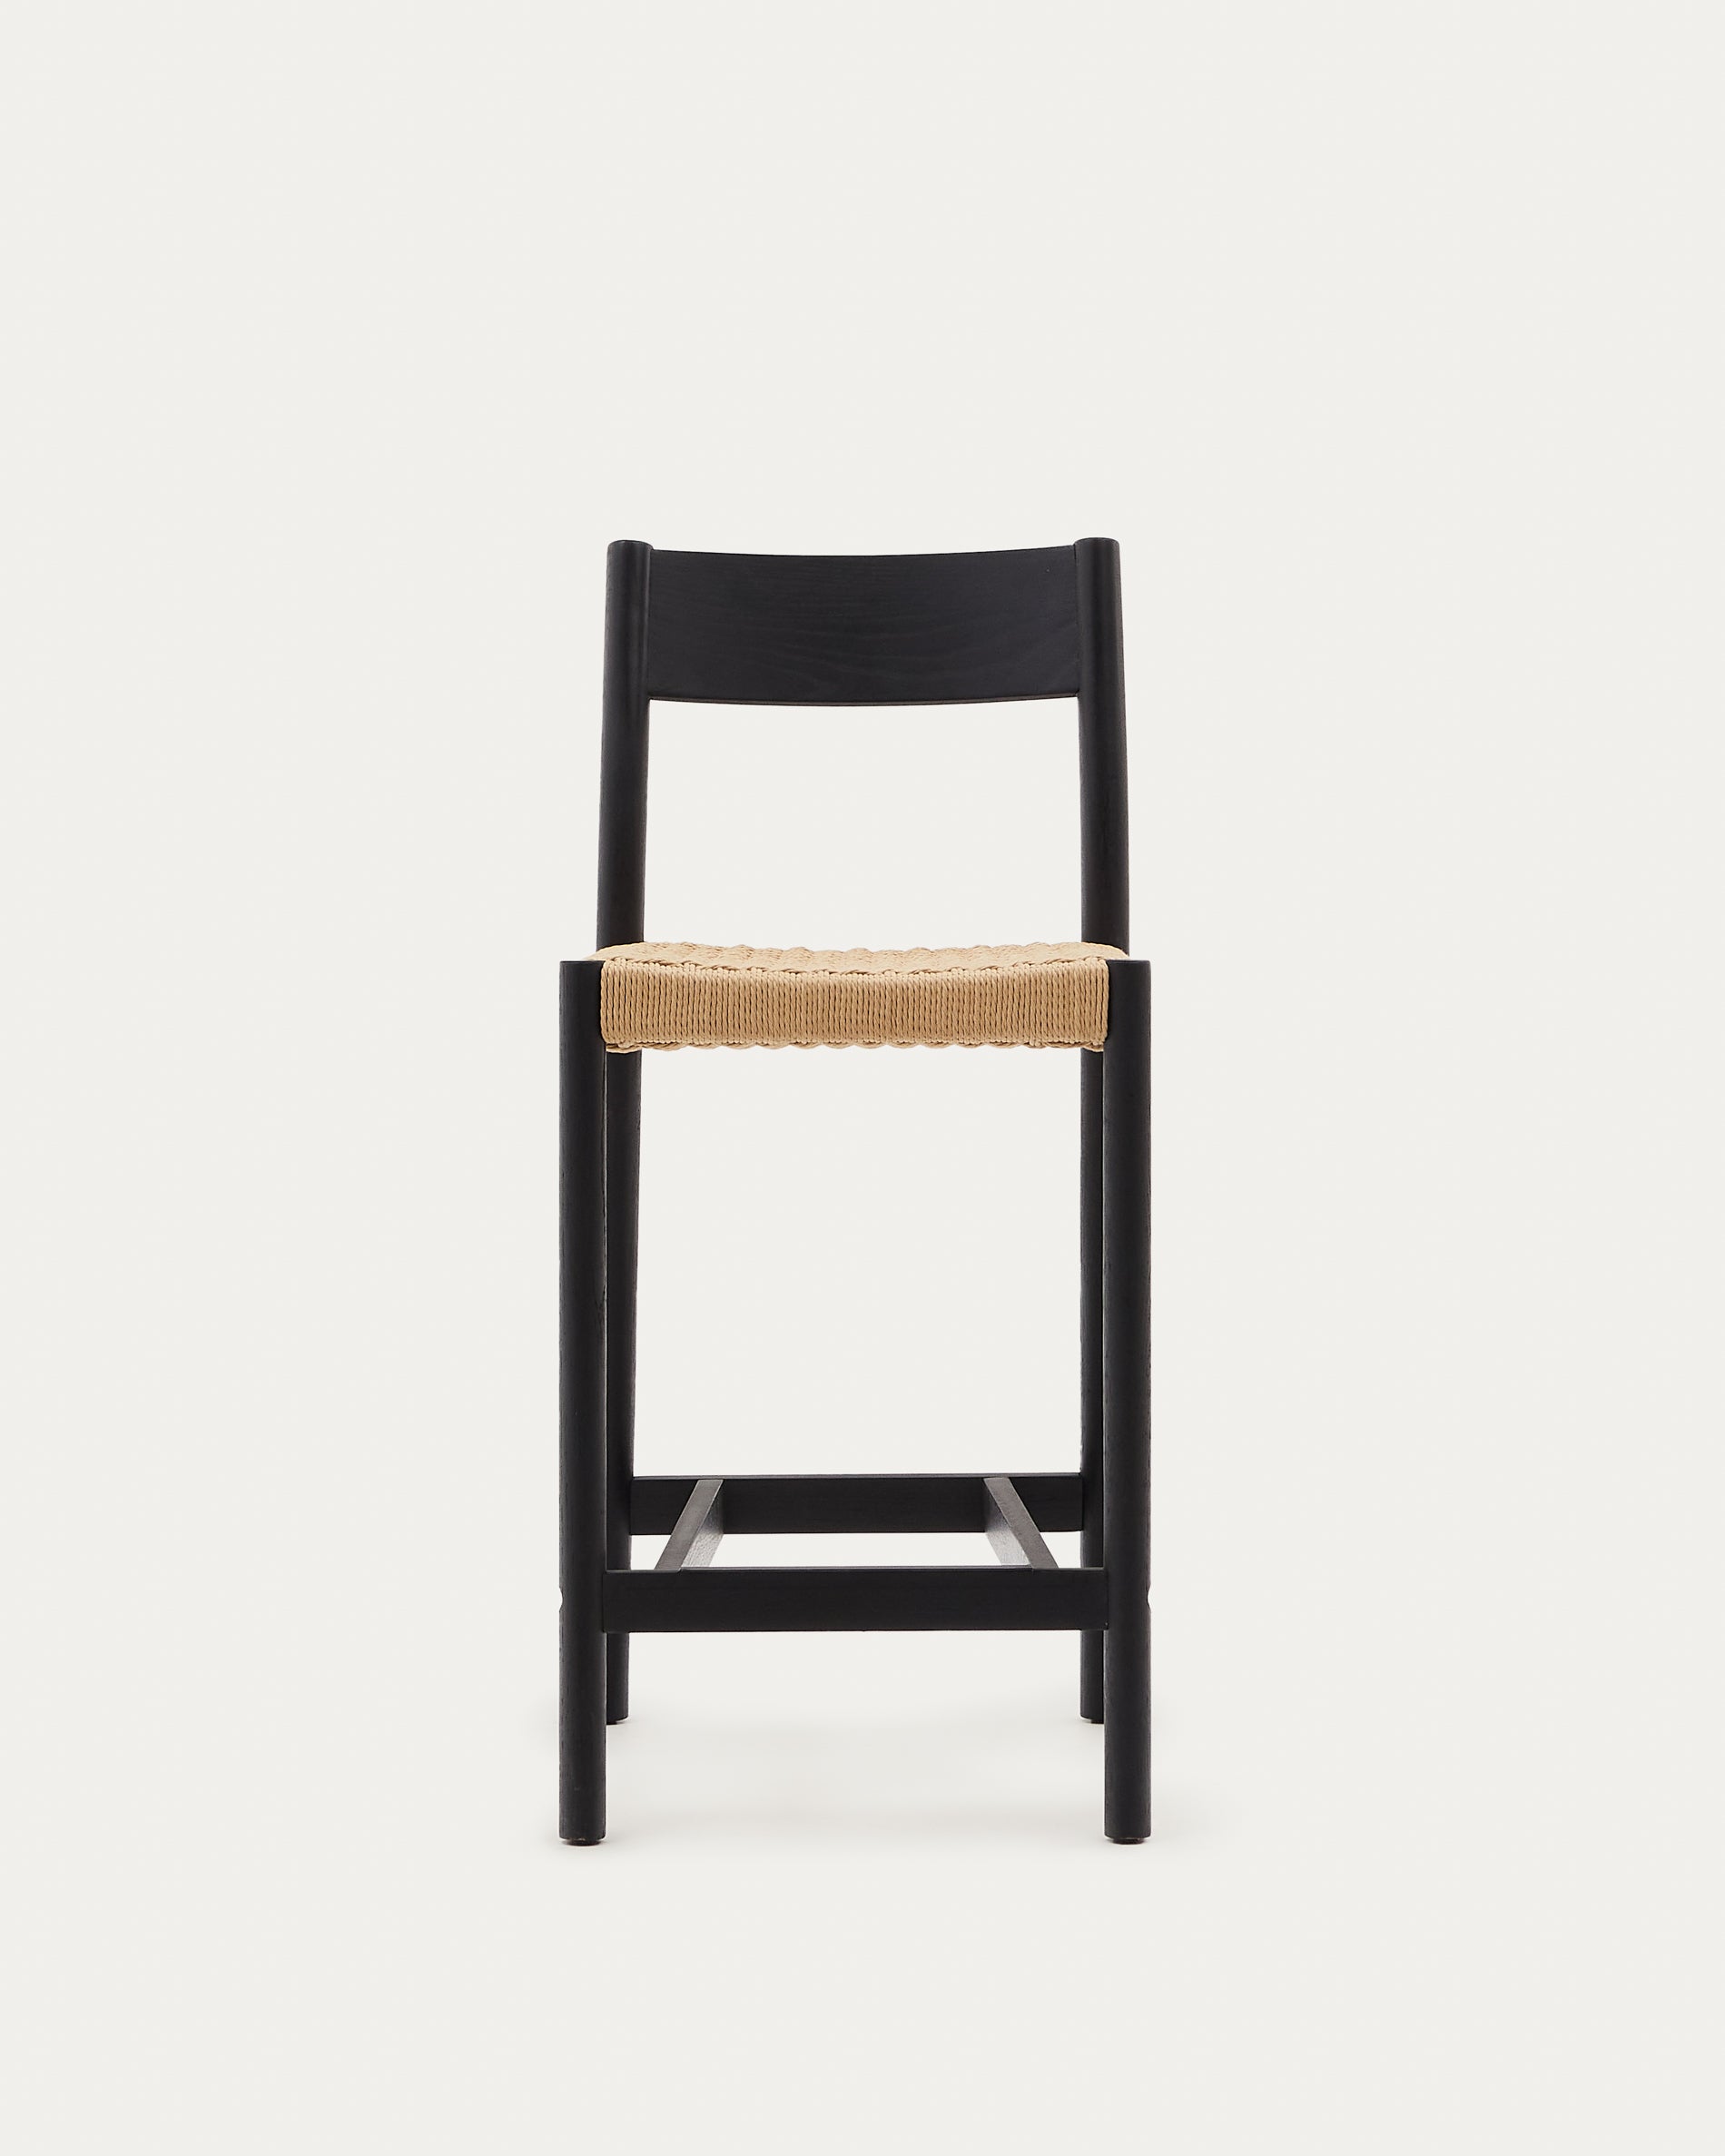 Yalia chair with back, solid oak with black finish and rope seat, 65 cm 100% FSC